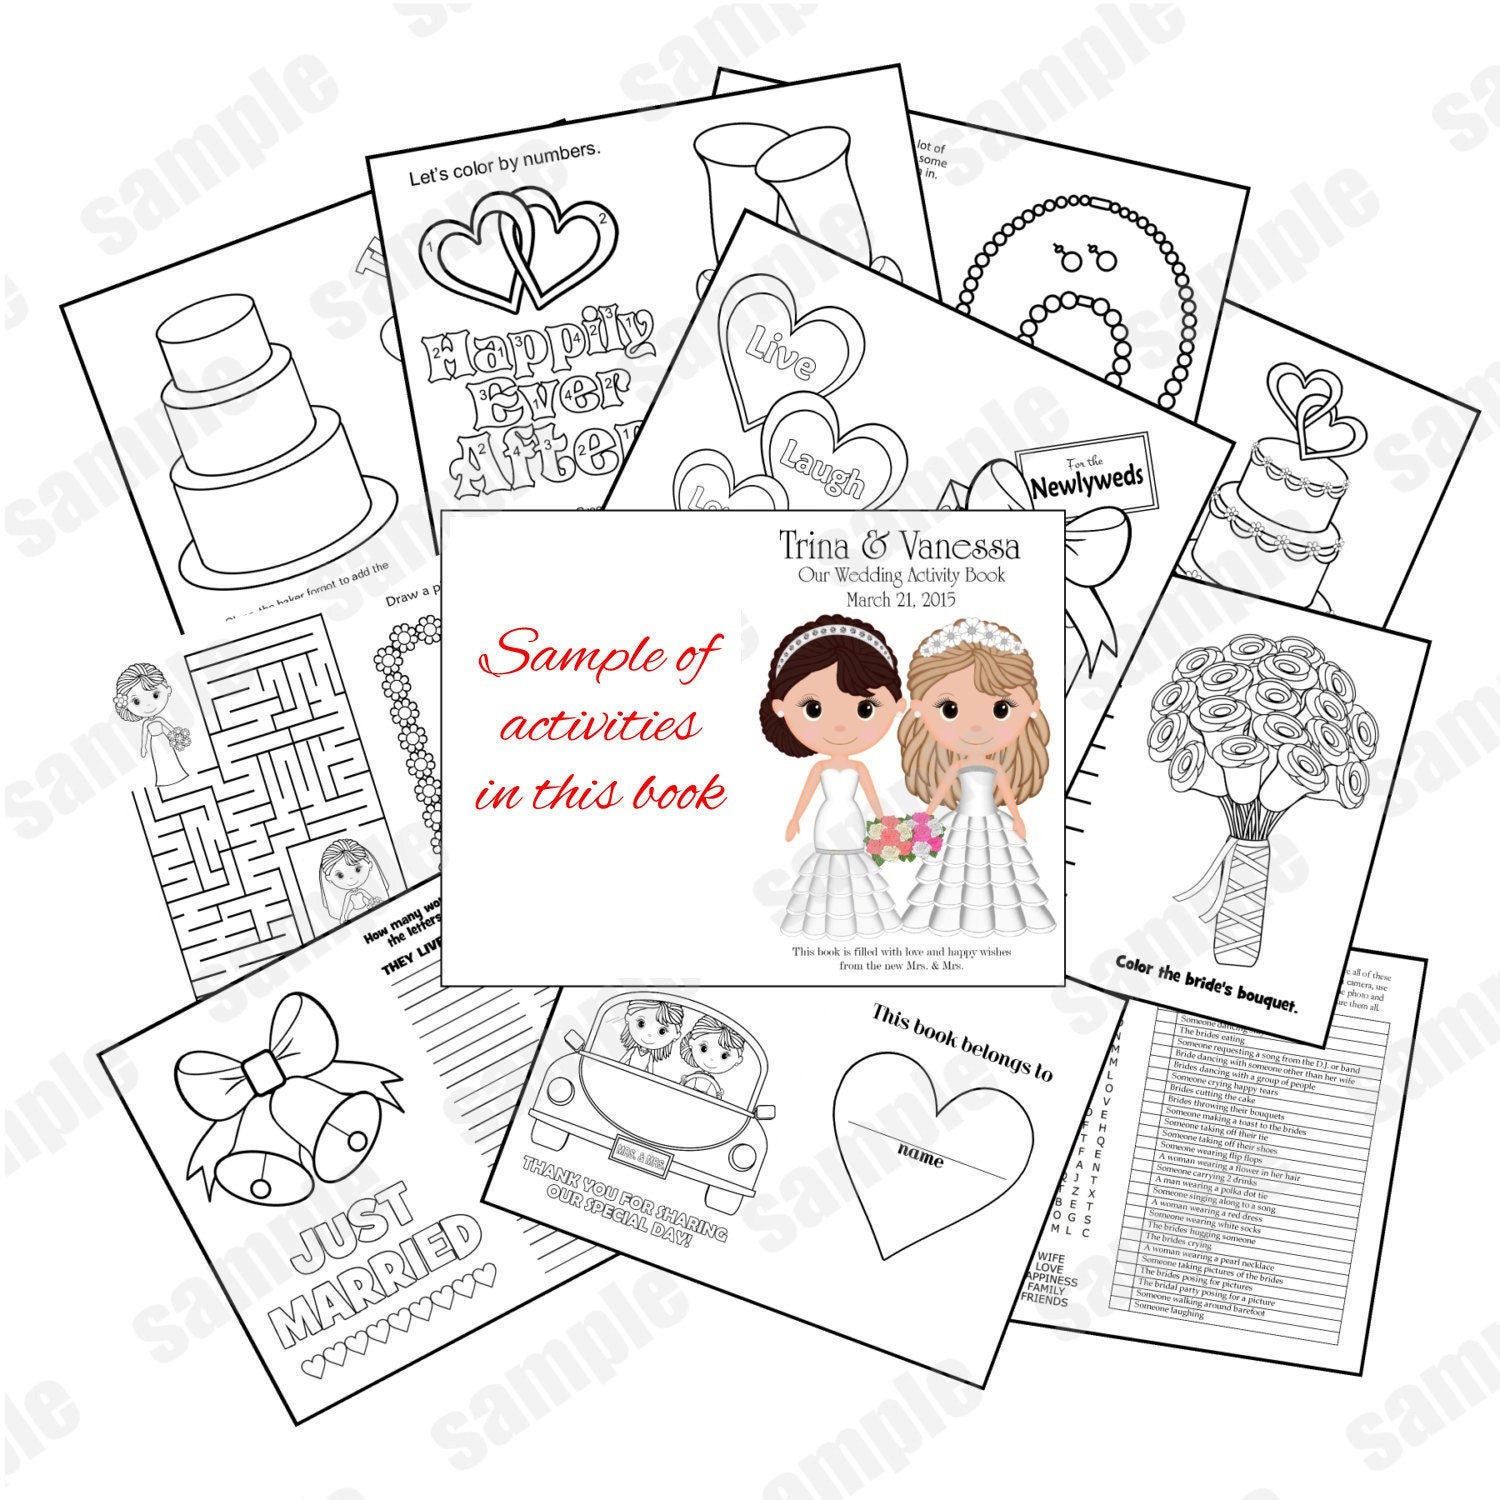 Western Rustic Wedding coloring activity book Printable Personalized Favor  Kids 8.5 x 11 PDF or JPEG TEMPLATE